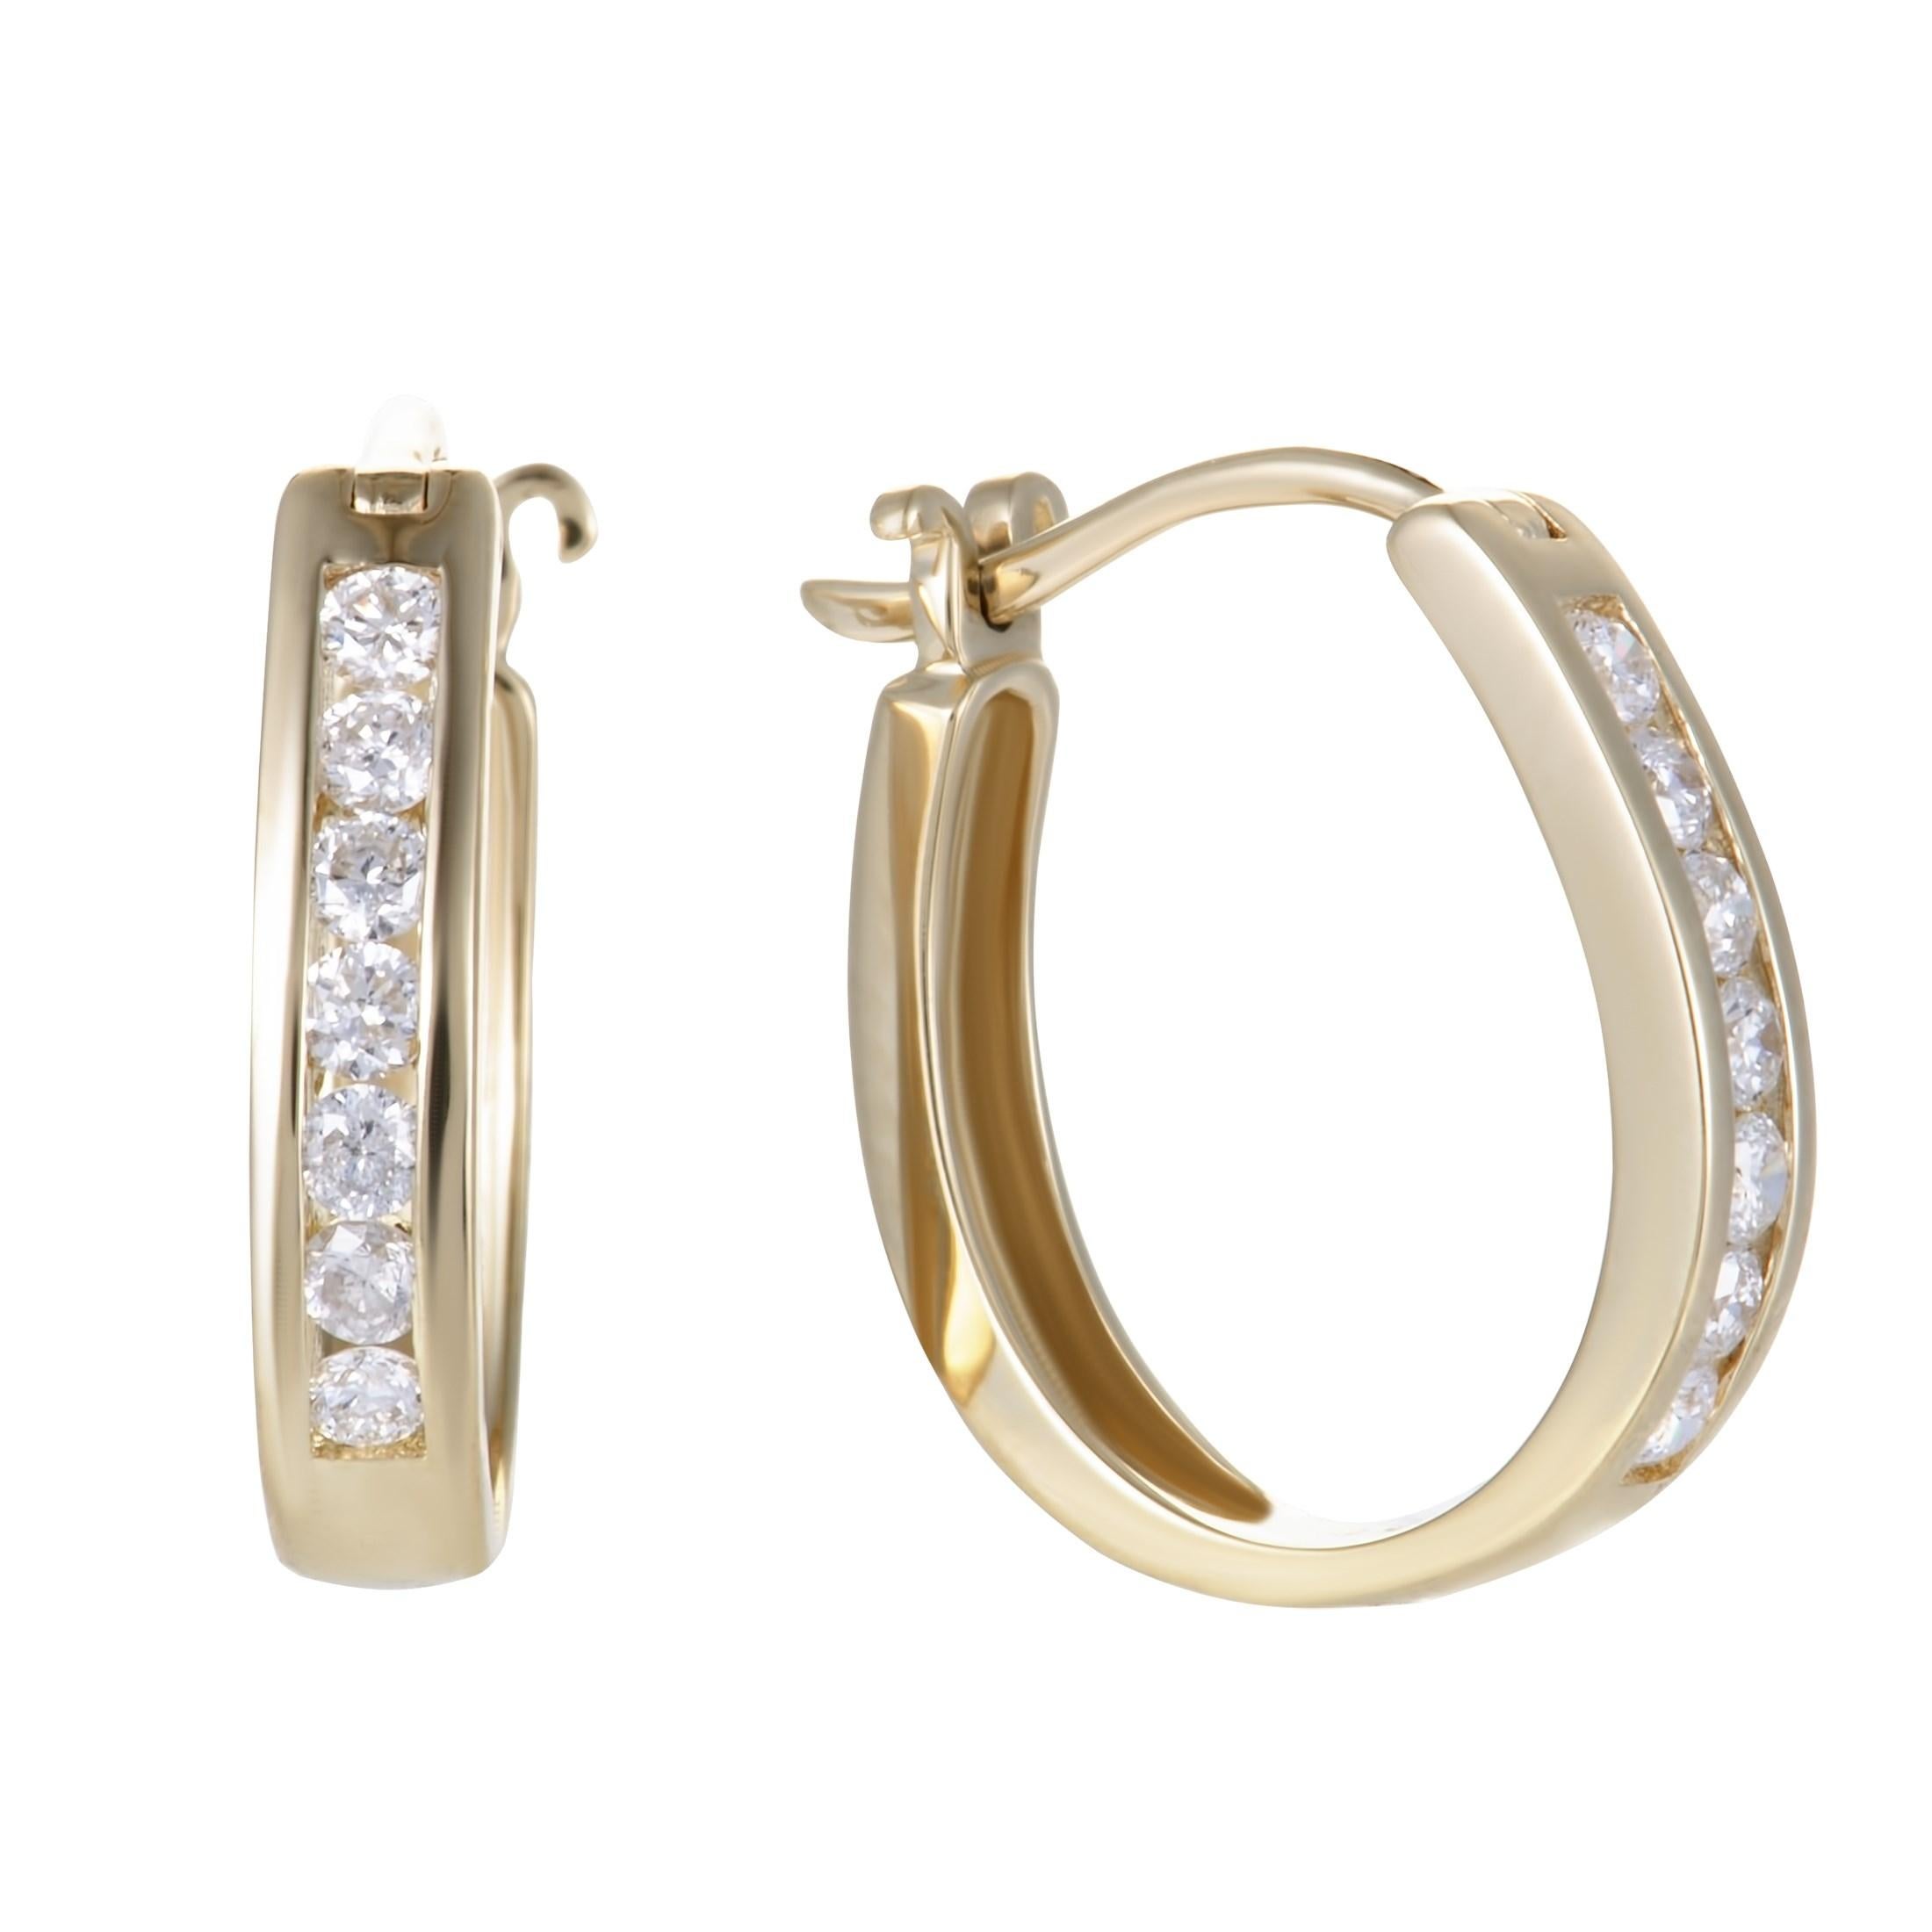 With a design that is both subtle and attractive, these superb hoop earrings offer a look of exceptional class and femininity. Made of 14K yellow gold, the pair weighs 2.6 grams and is set with diamonds that total 0.33 carats.
